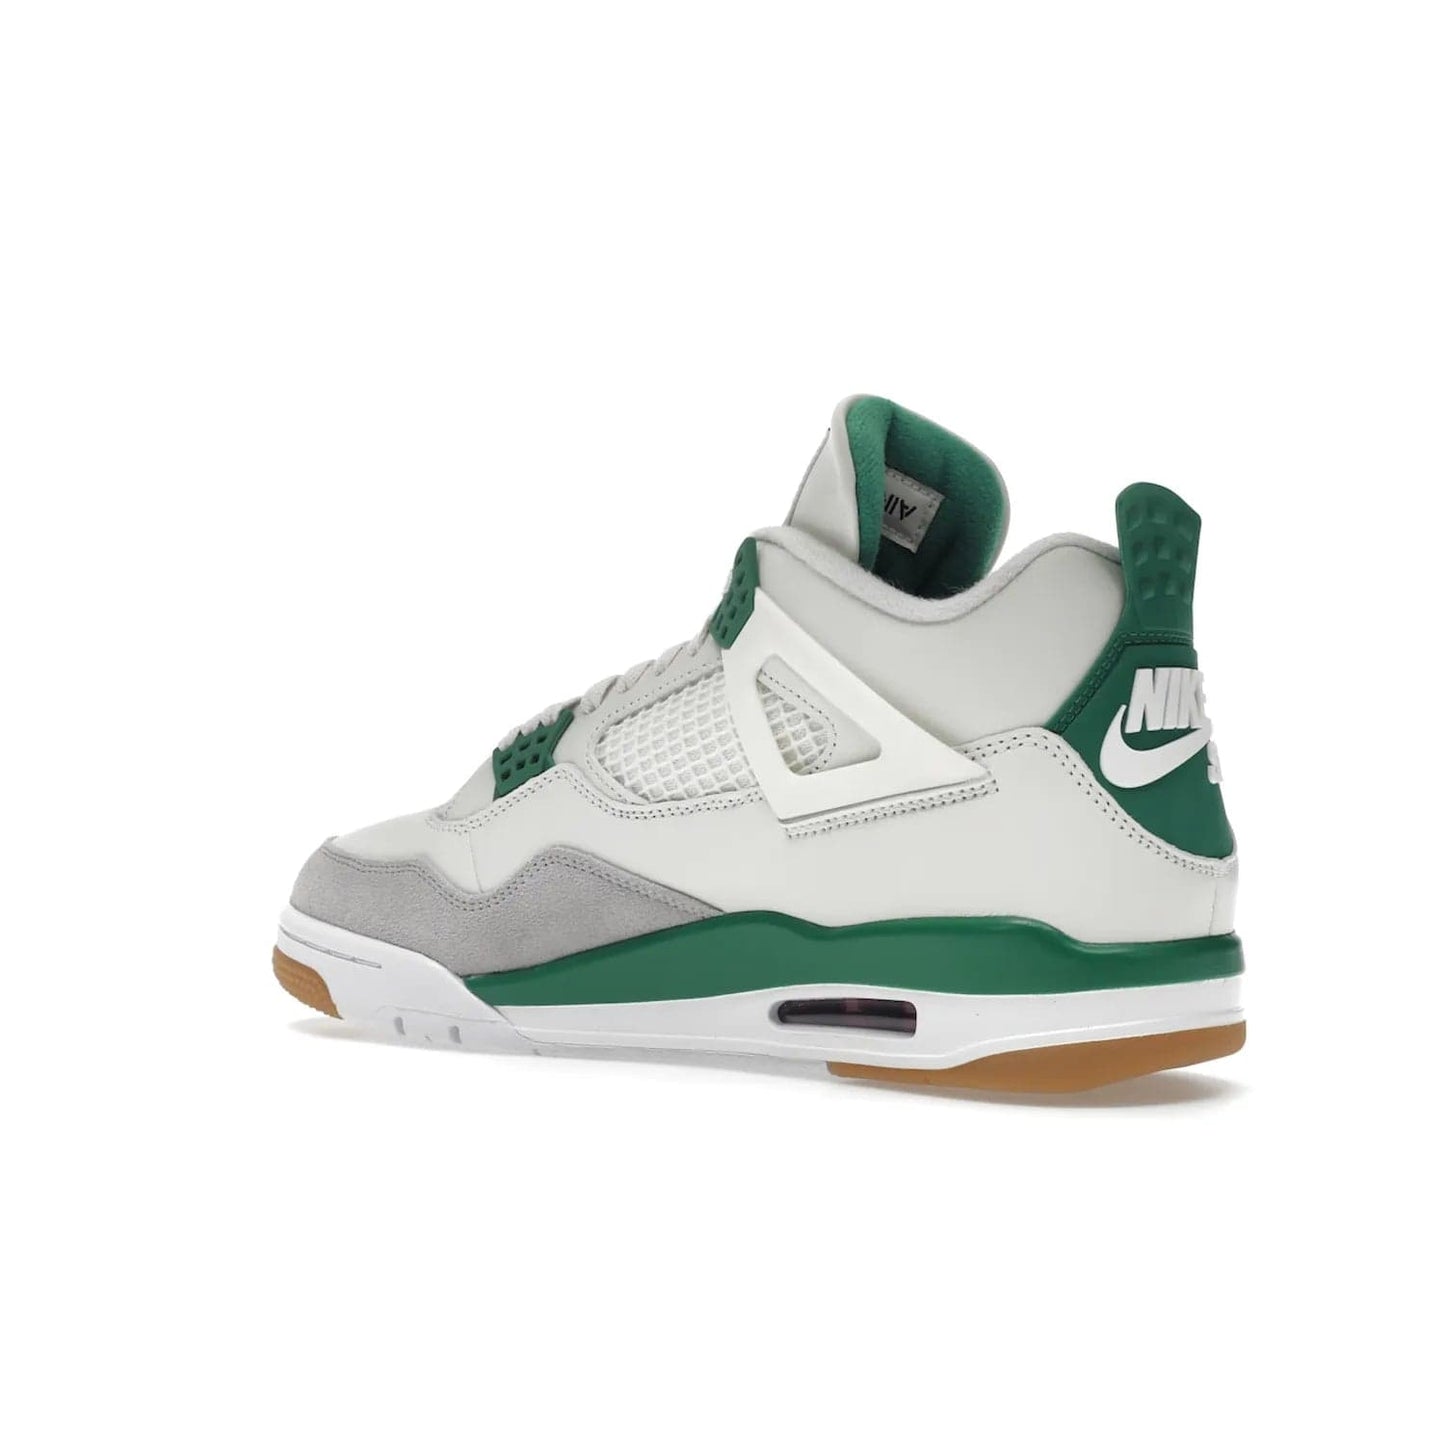 Jordan 4 Retro SB Pine Green - Image 23 - Only at www.BallersClubKickz.com - A white leather upper combined with a Neutral Grey suede mudguard gives this limited Air Jordan 4 Retro SB Pine Green sneaker its unmistakable style. Released March 20, 2023, the Jordan 4 Retro SB features a white and Pine Green midsole plus a red air unit with a gum outsole for grip. The perfect blend of Nike SB skateboarding and Jordan 4 classic design.